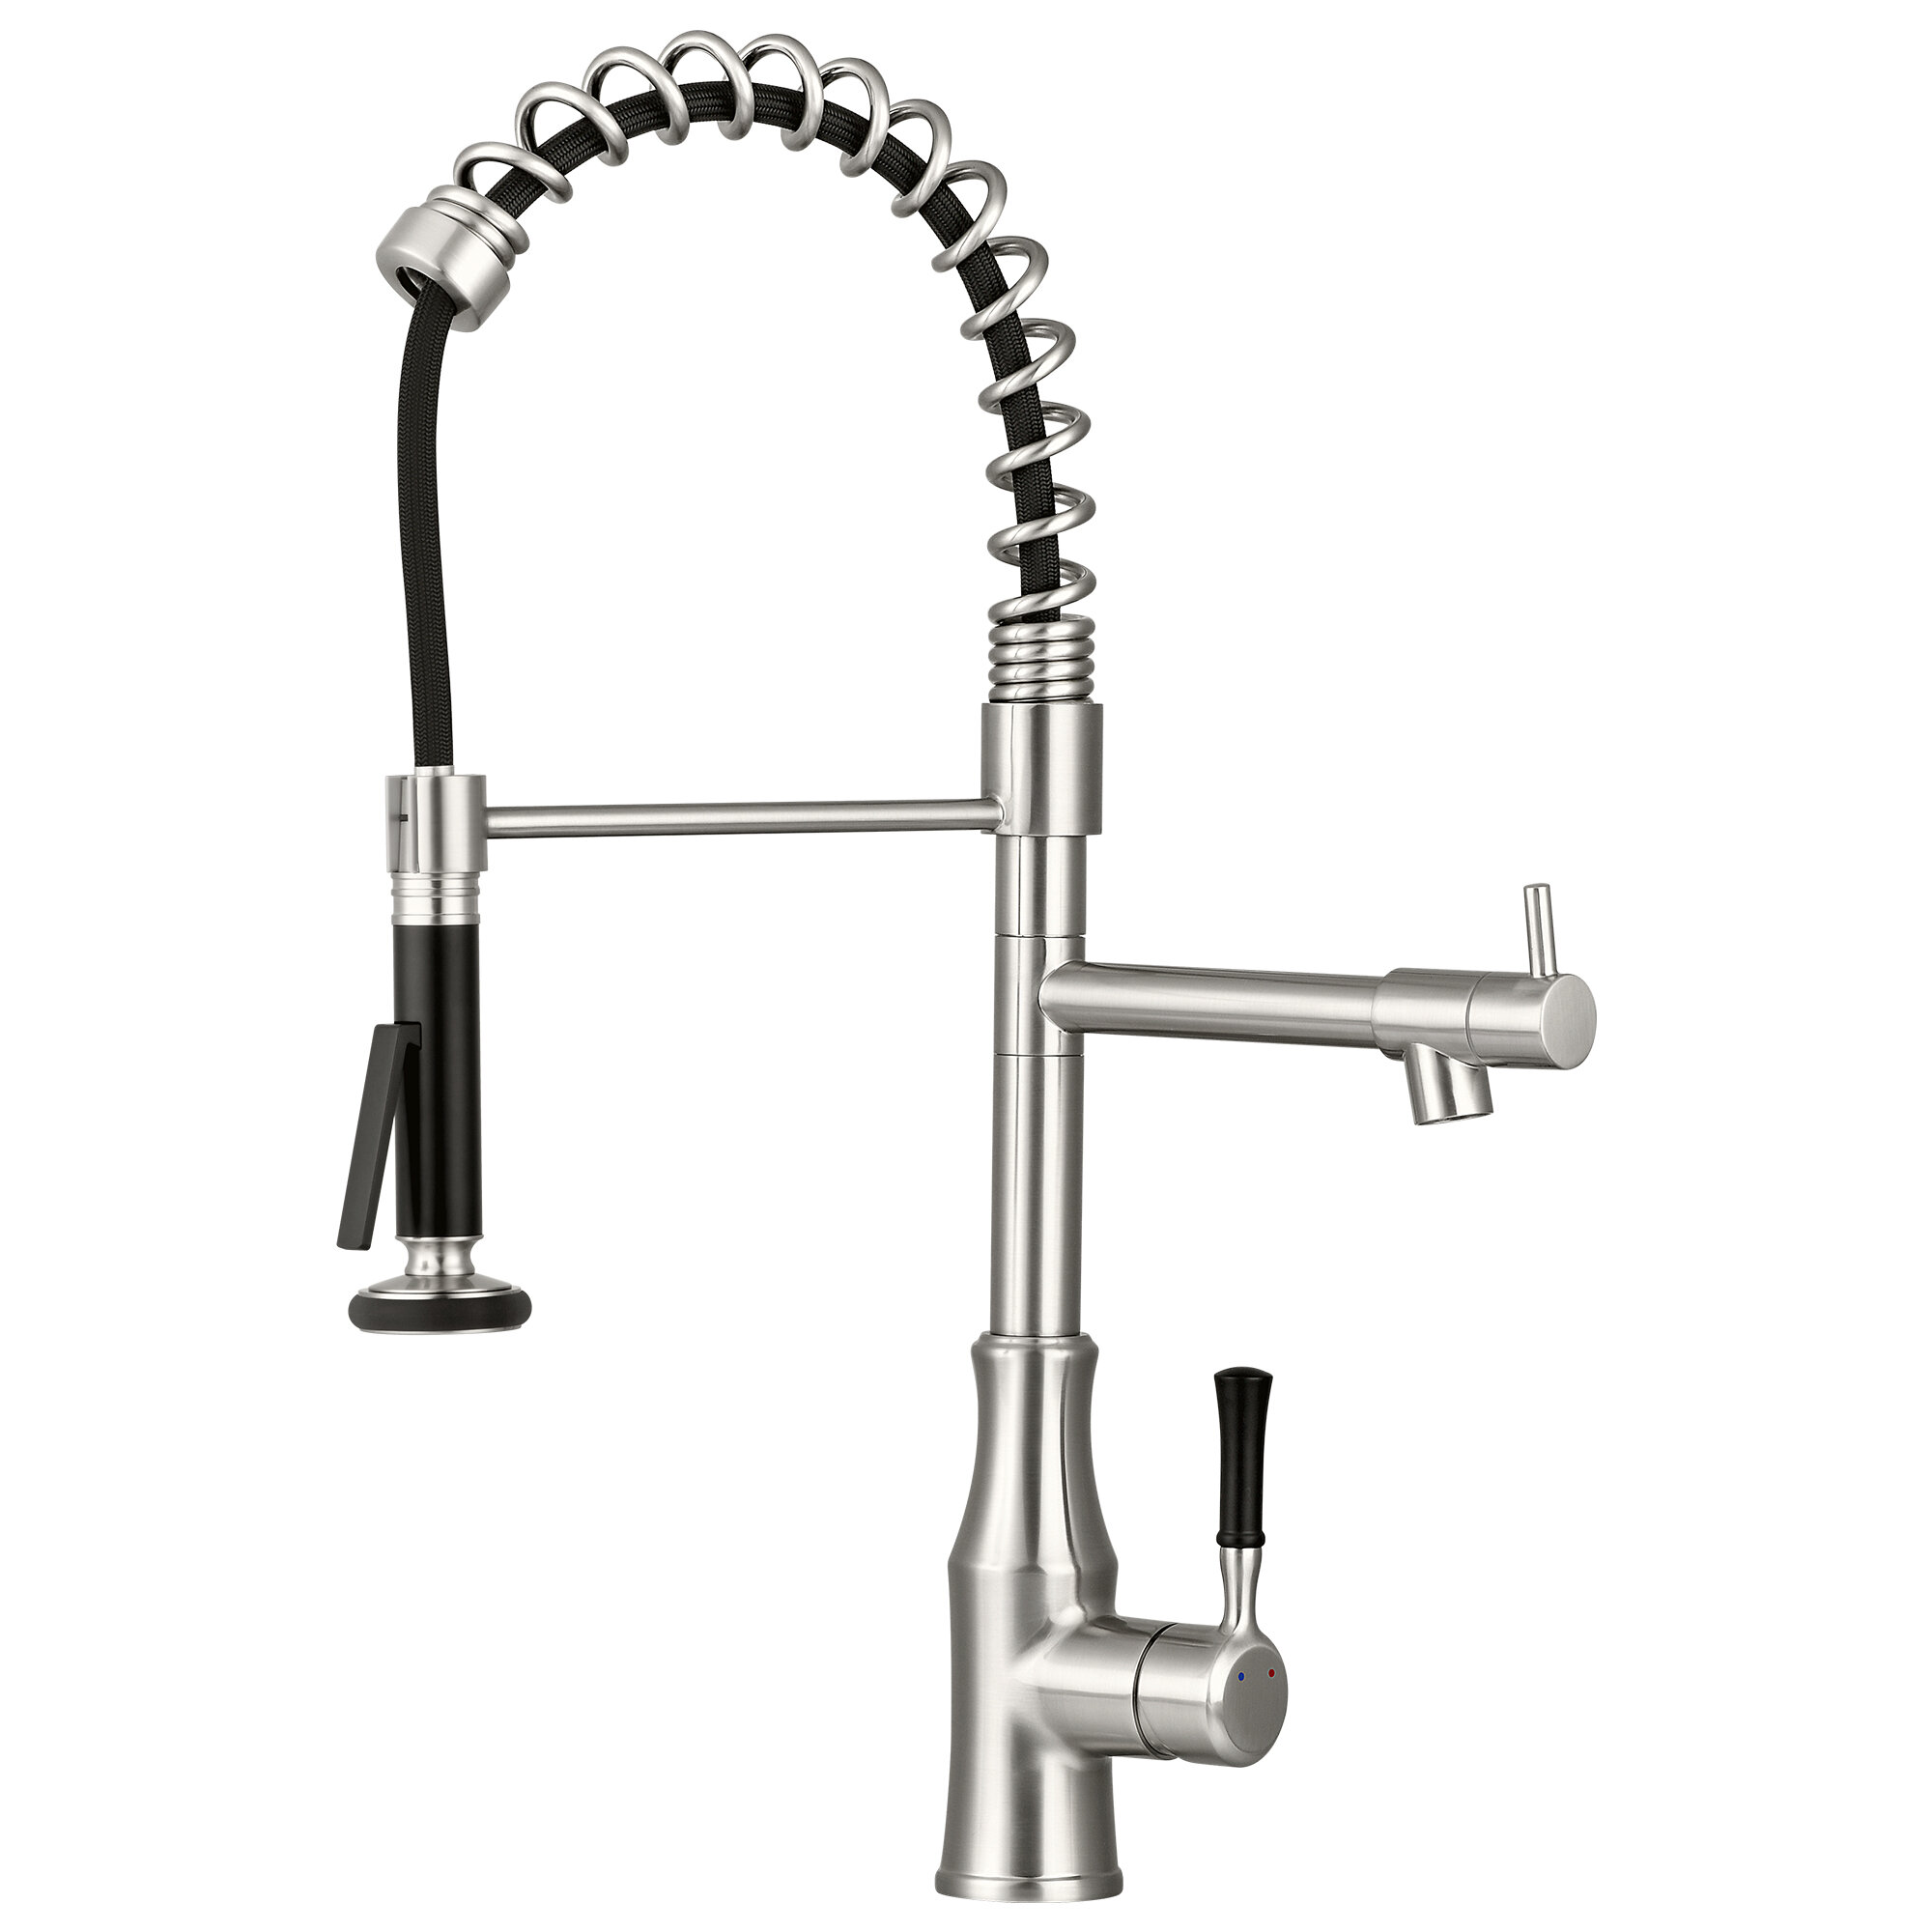 Details about   YITAHOME 360° Swivel Tap Sink Mixer Extender Faucet Dual Spray Kitchen Sprayer